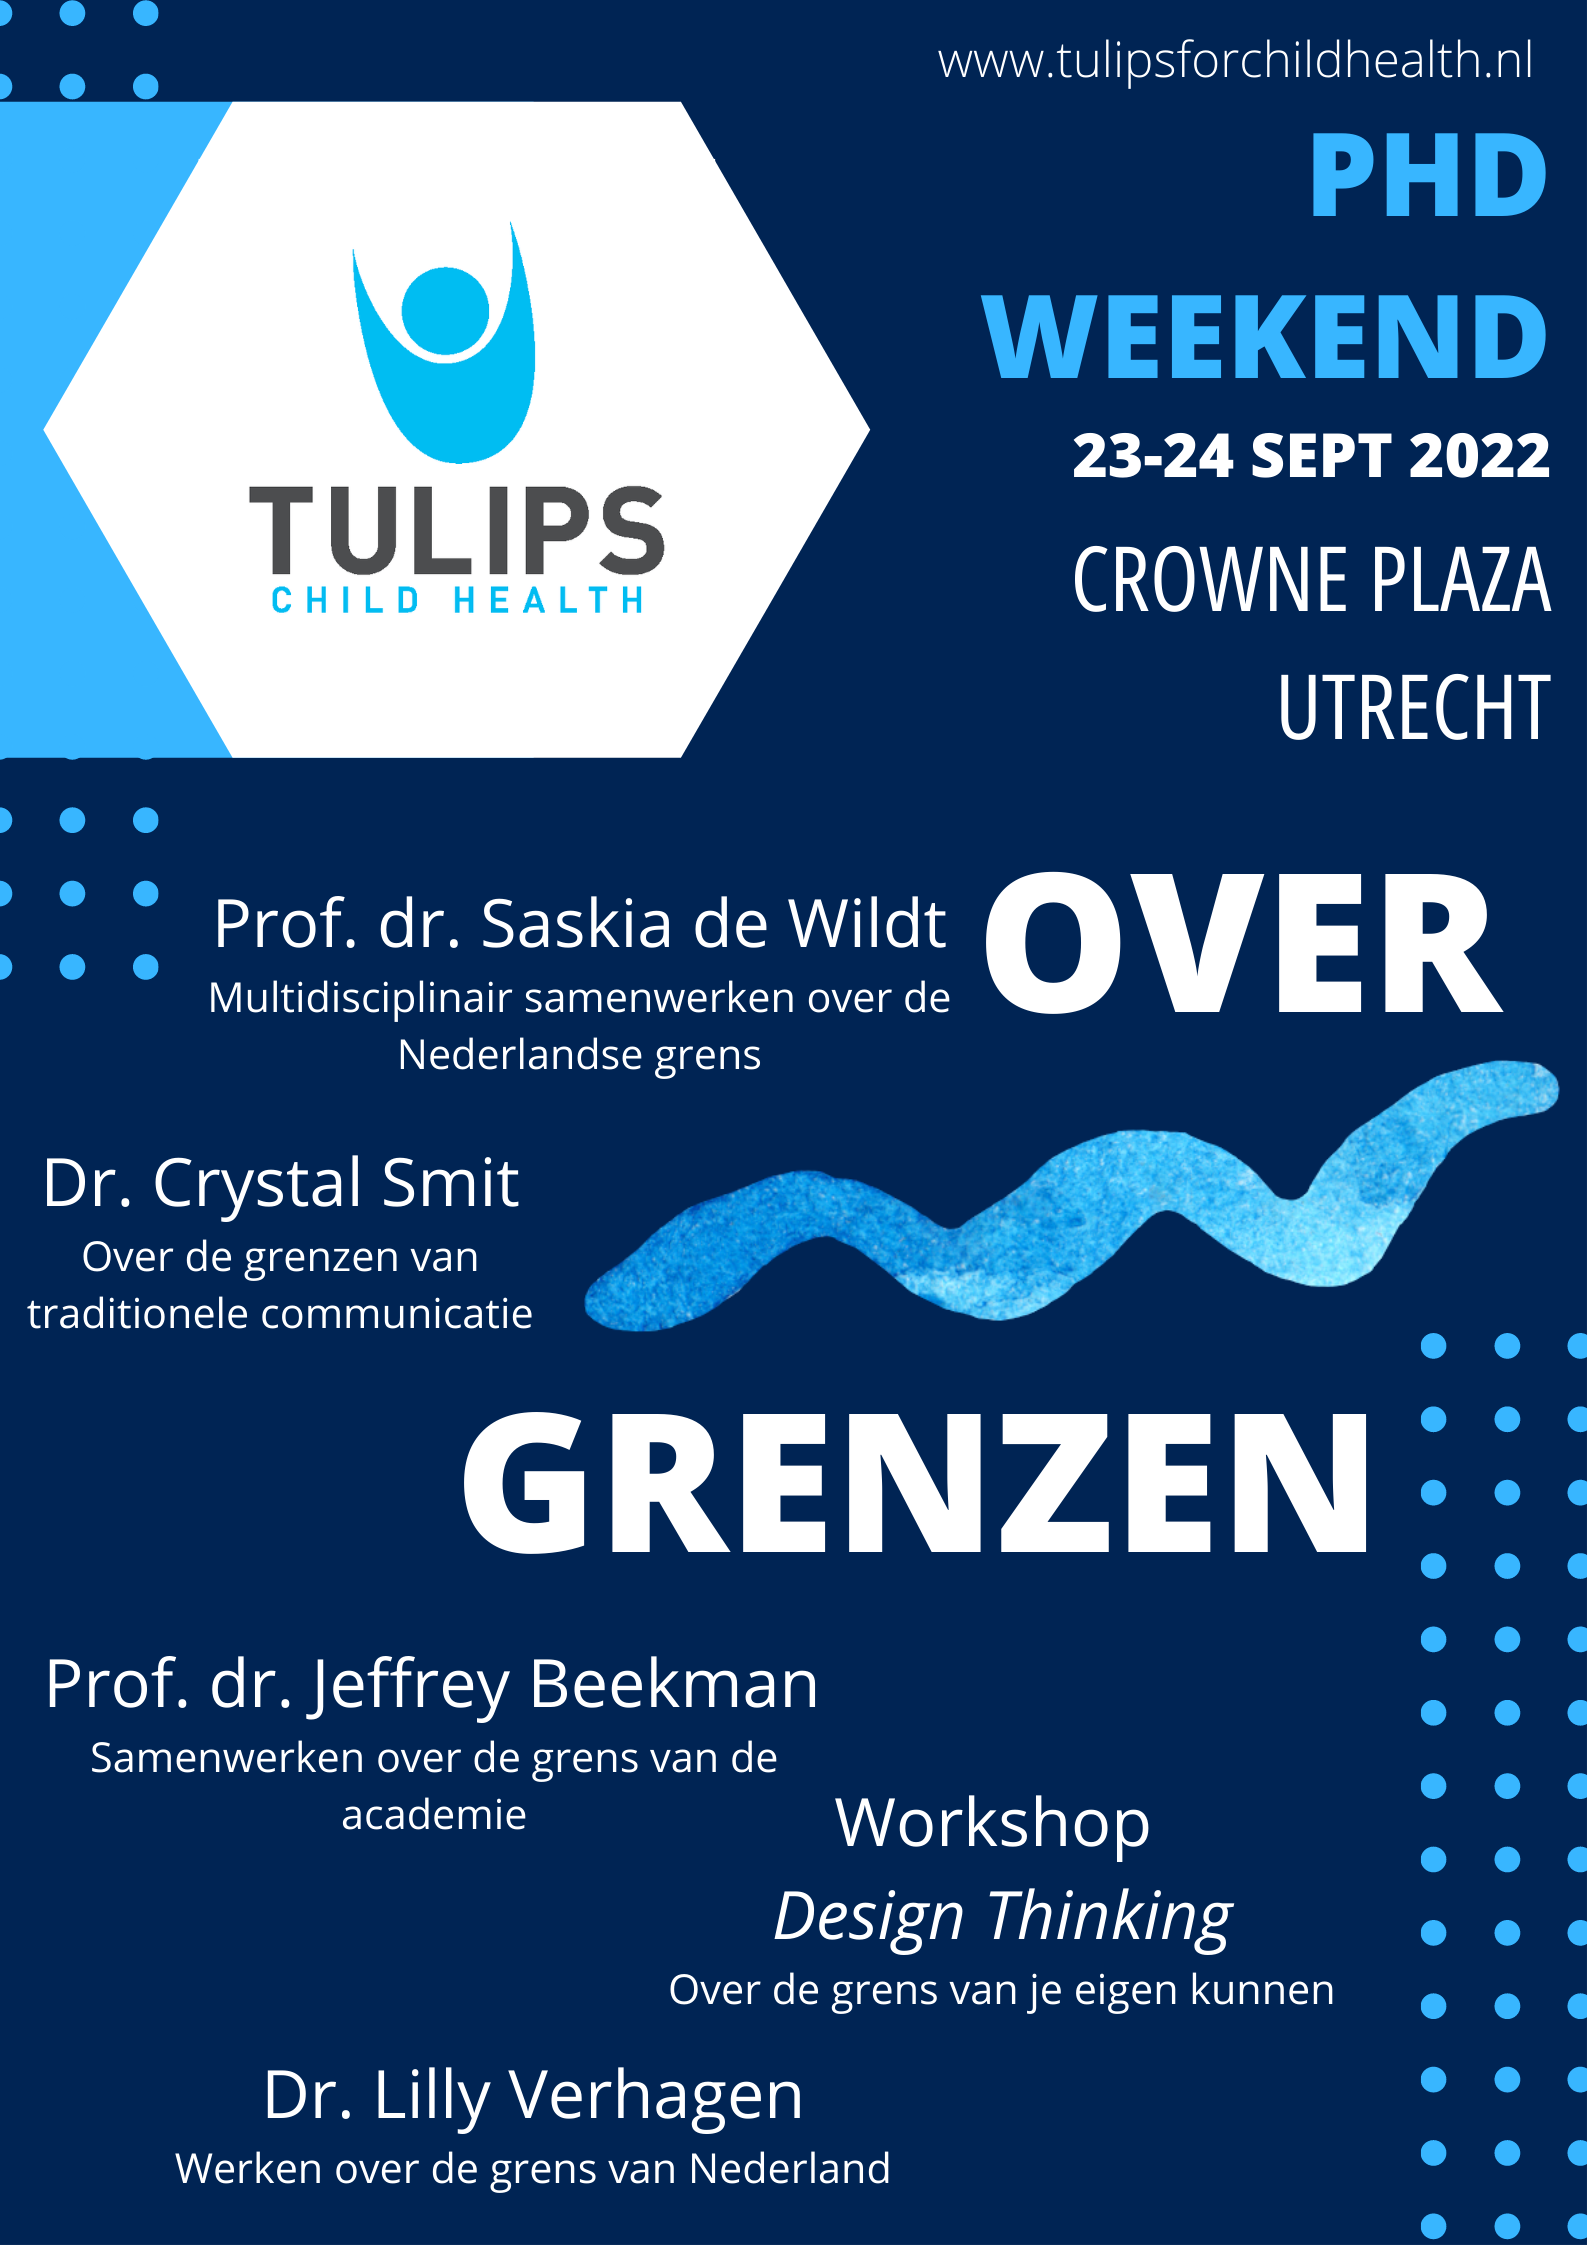 Save the date TULIPS PhD weekend 2022